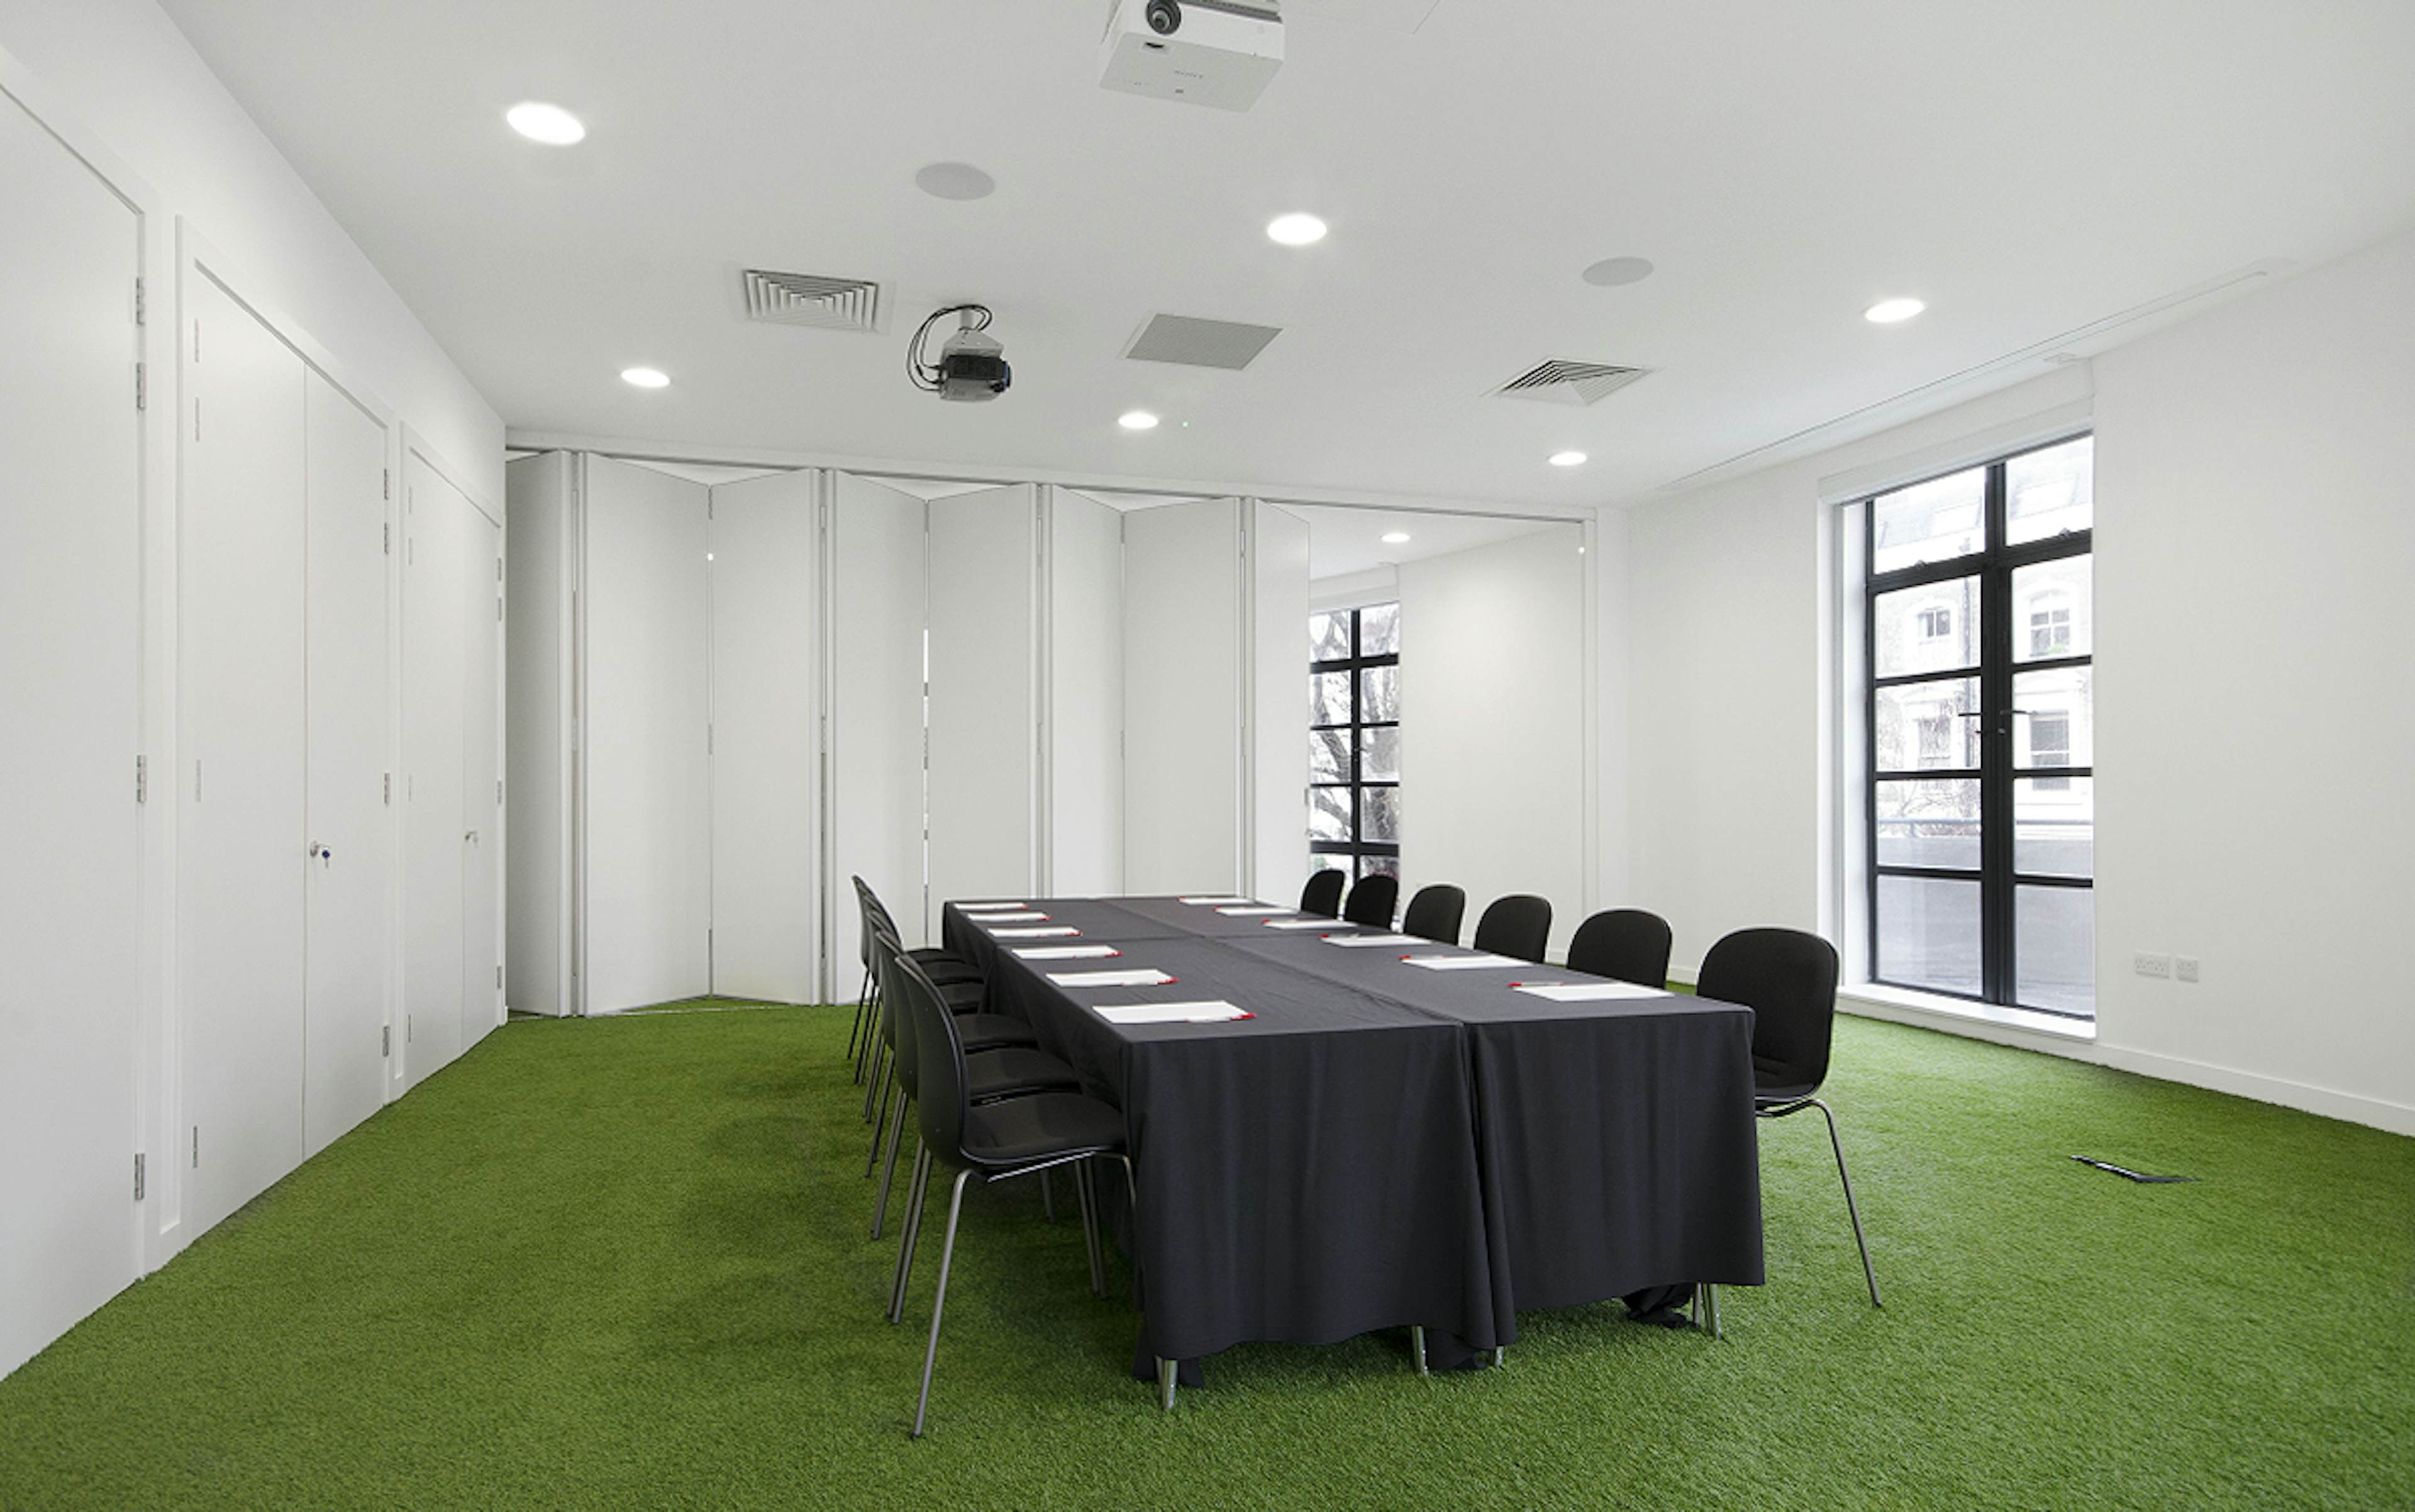 Museum of Brands - Conference Room image 1